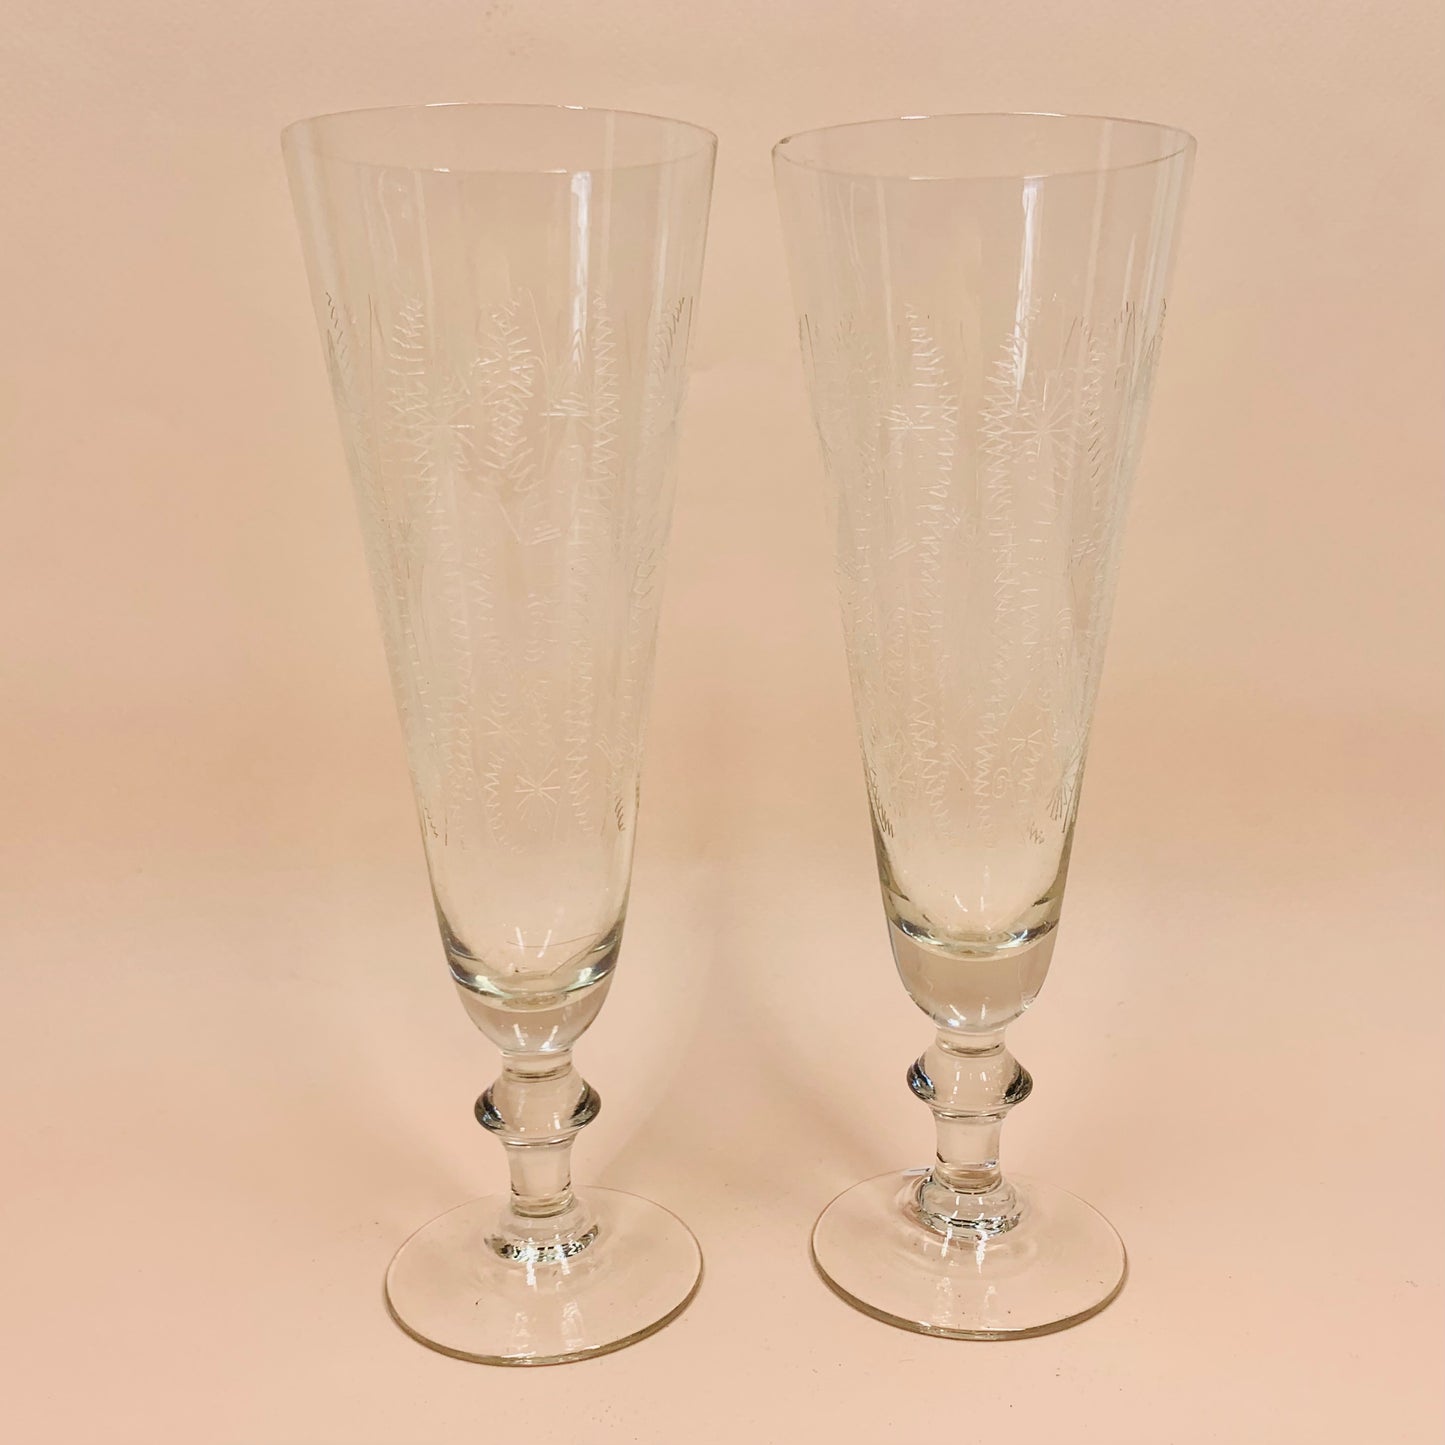 Antique hand etched glass champagne flutes